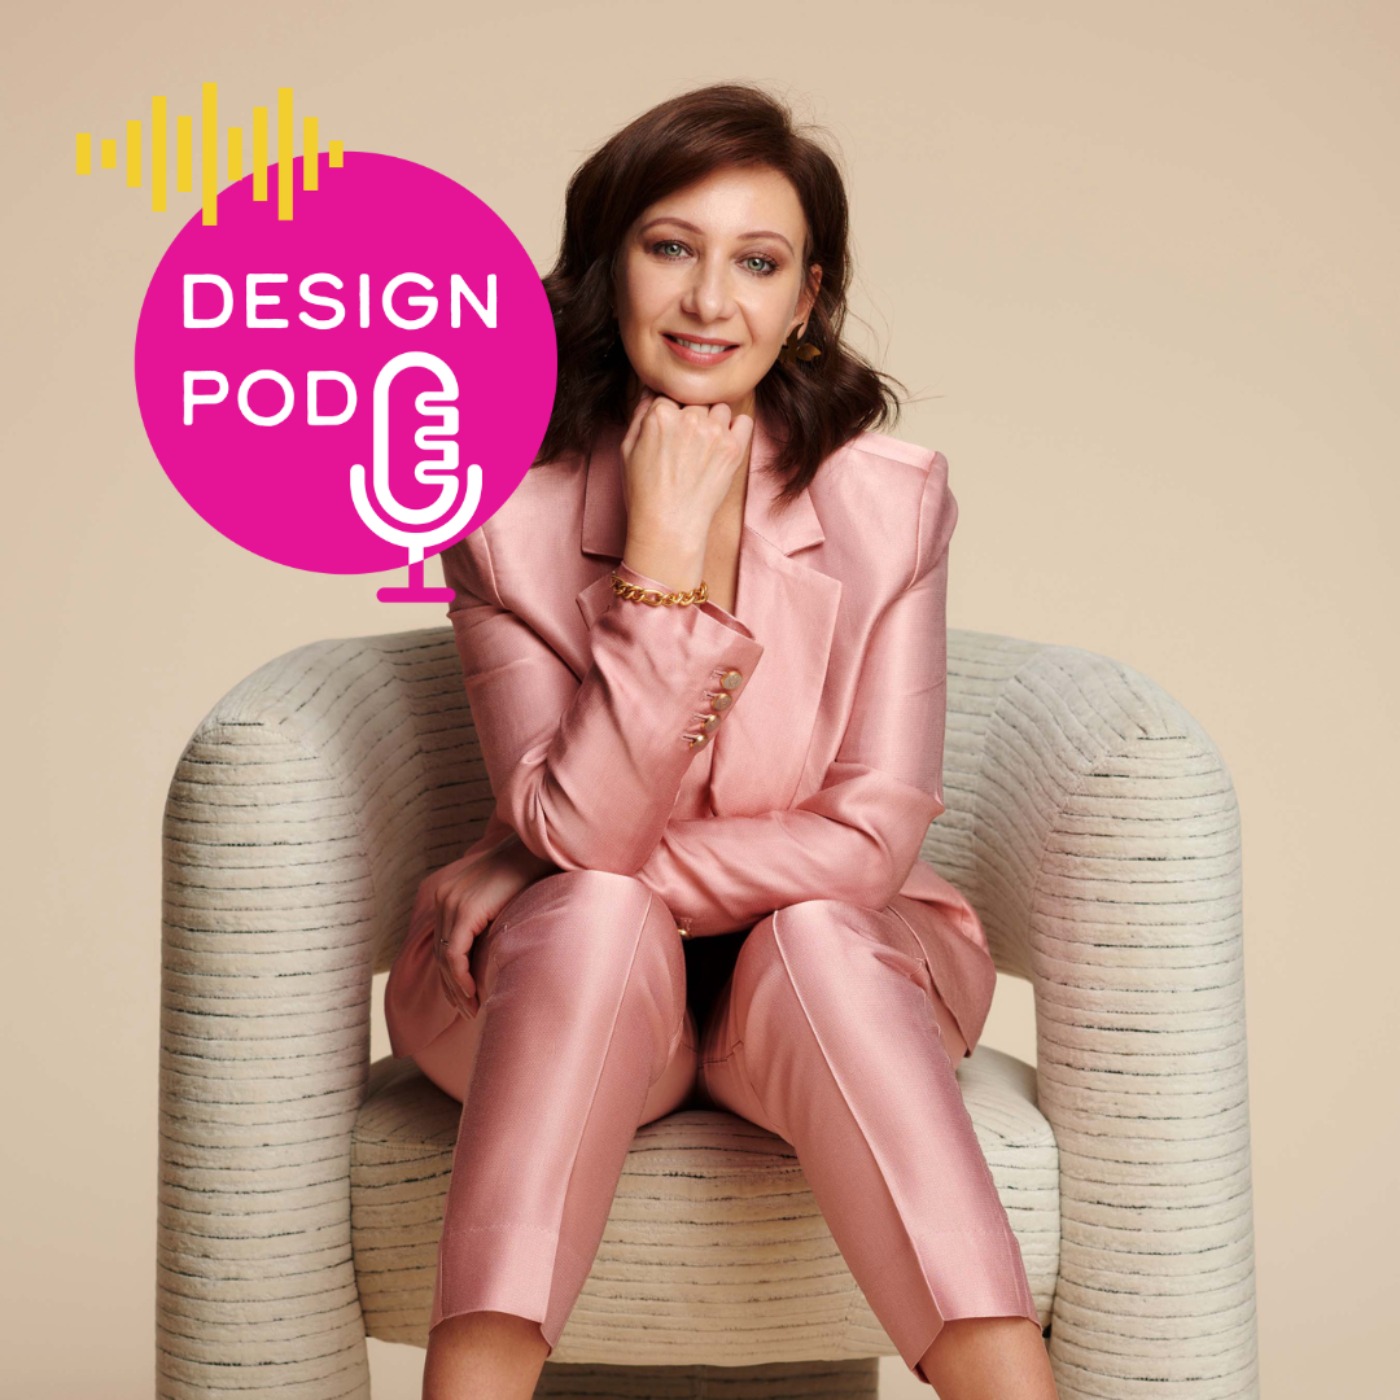 Episode 36: The Art of Creating Timeless Design Within an Ever-Changing Landscape